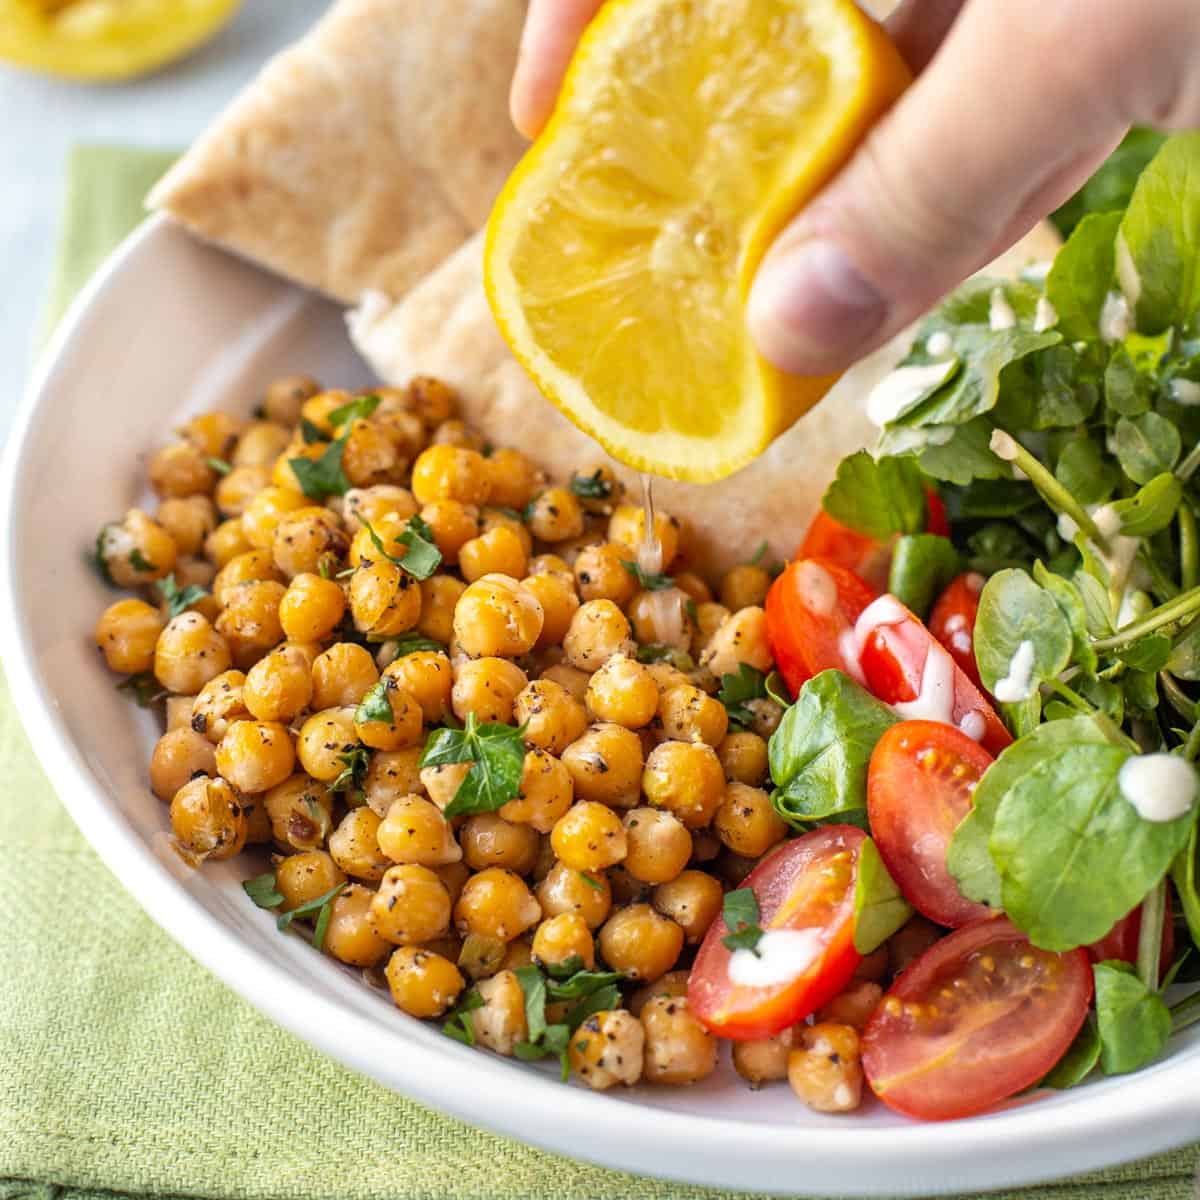 A hand squeezing lemon juice over some roasted chickpeas and salad.